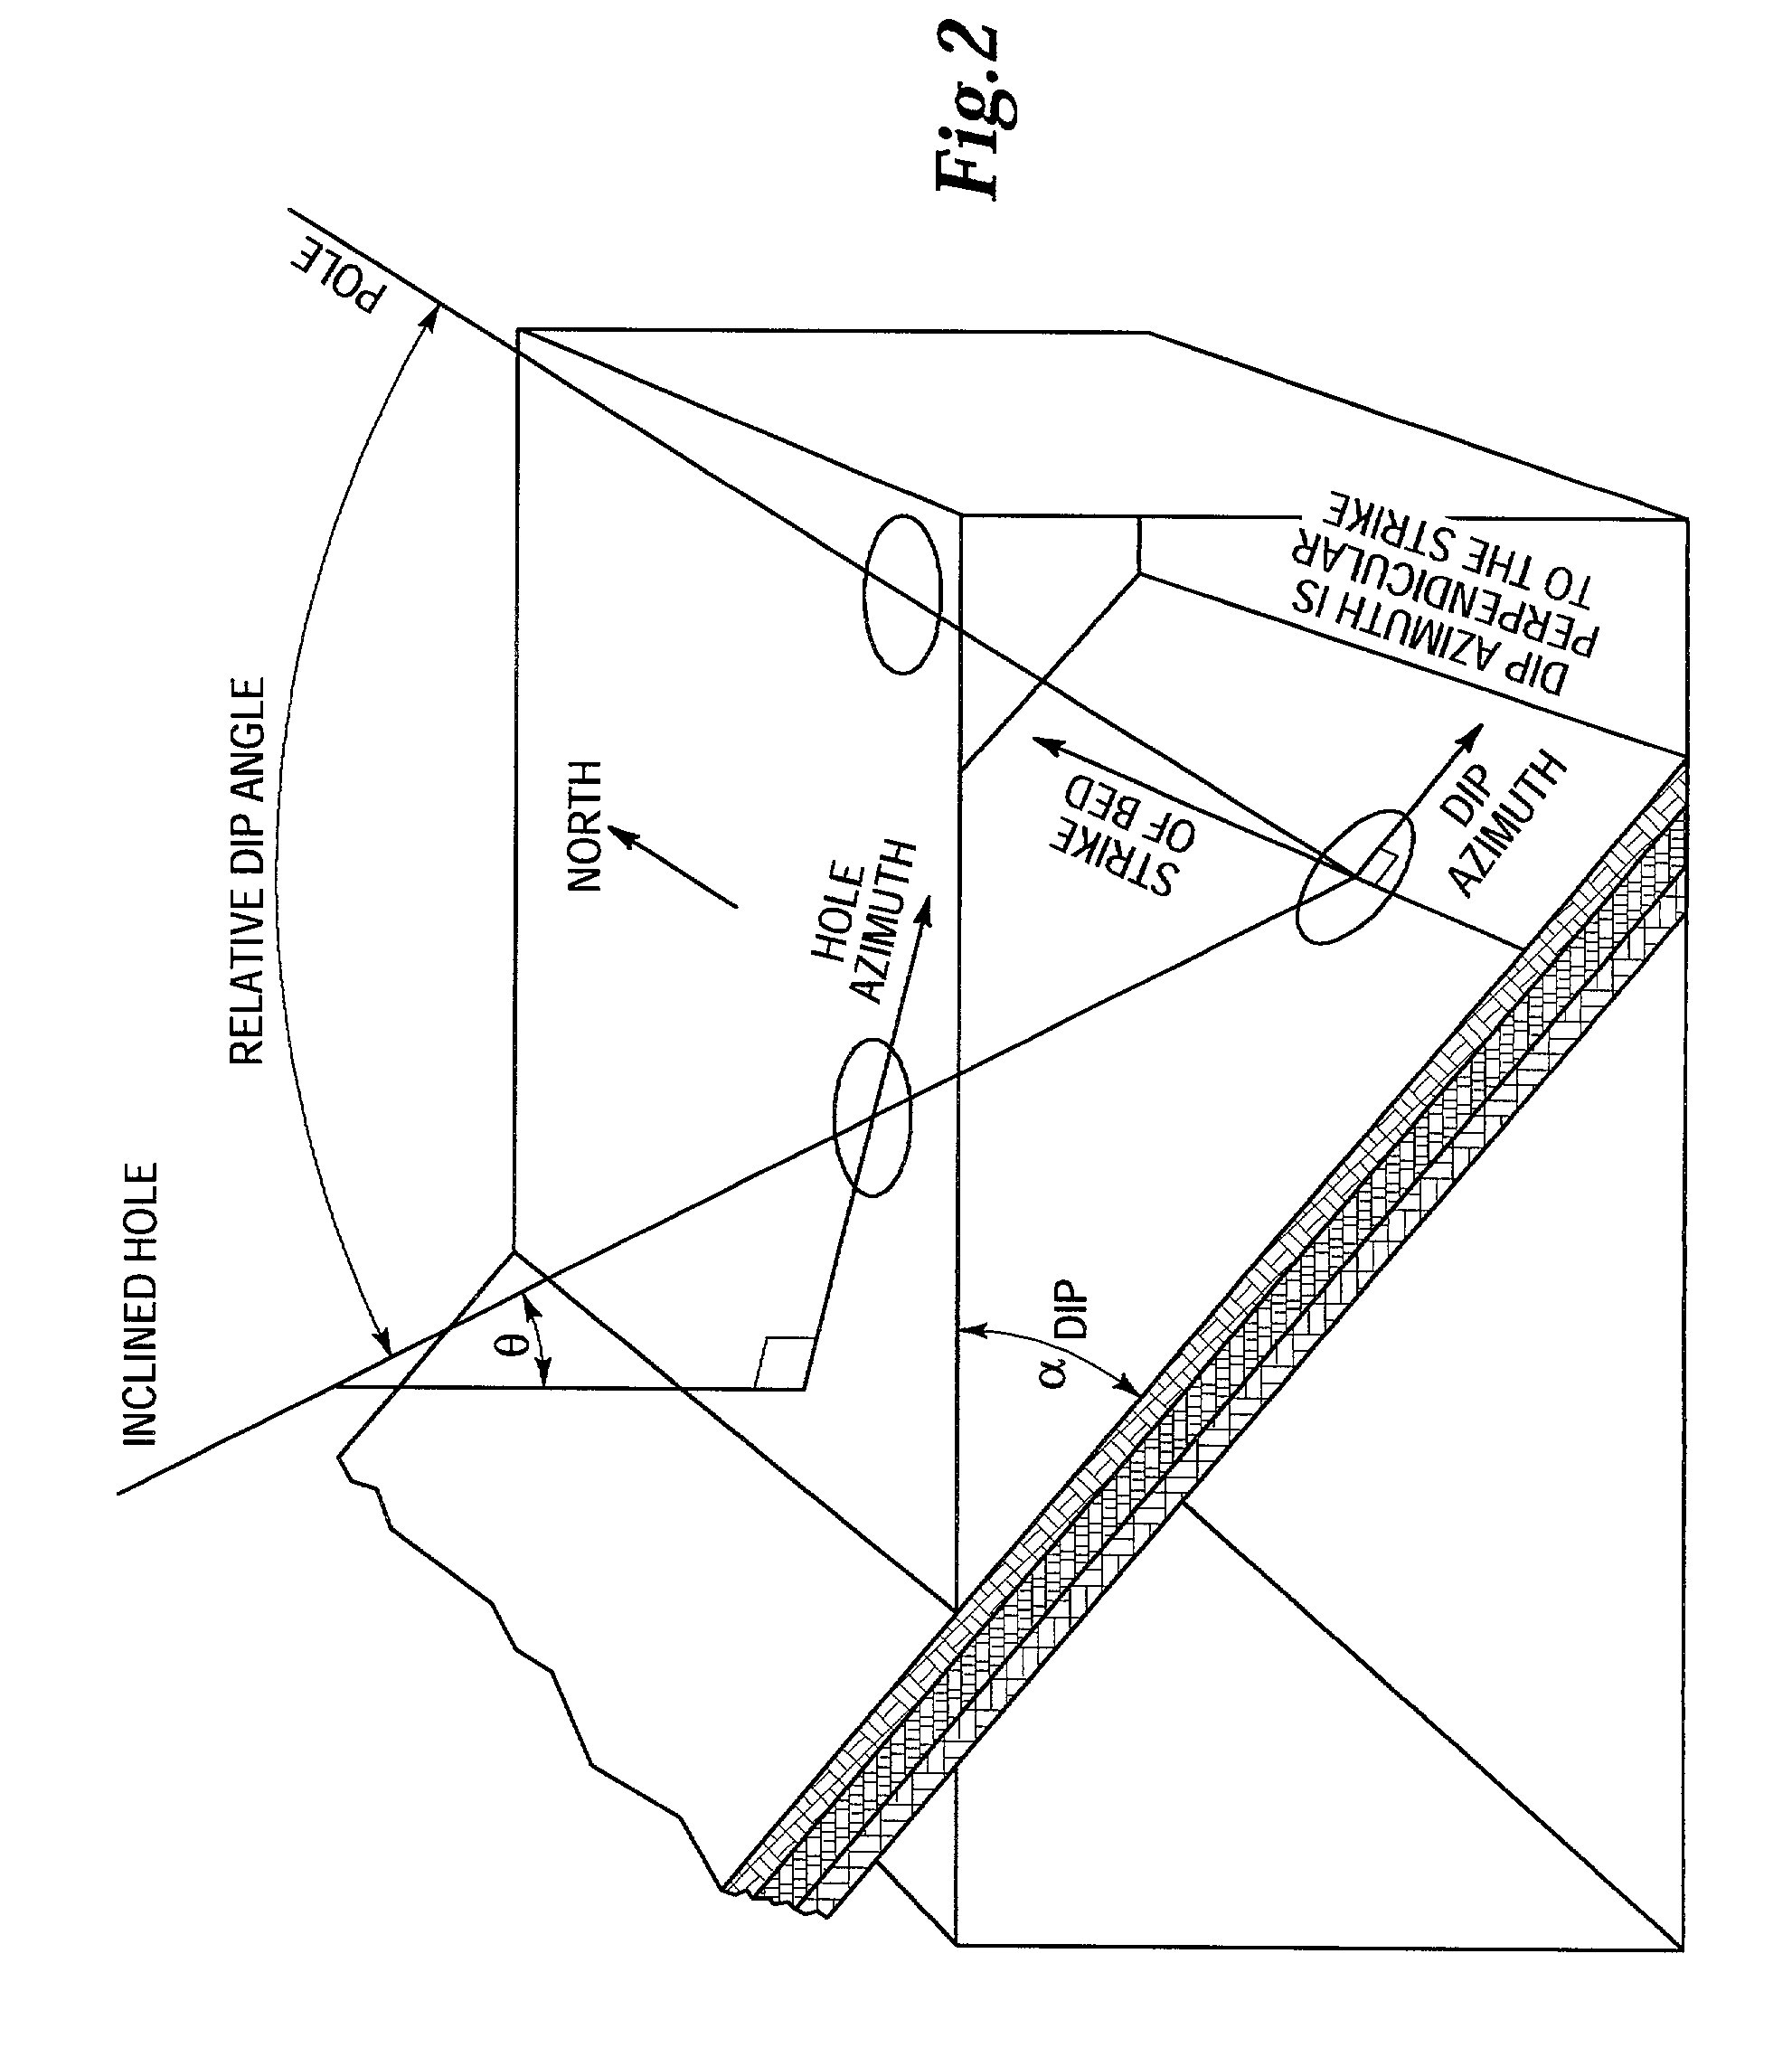 Method for determining parameters of earth formations surrounding a well bore using neural network inversion